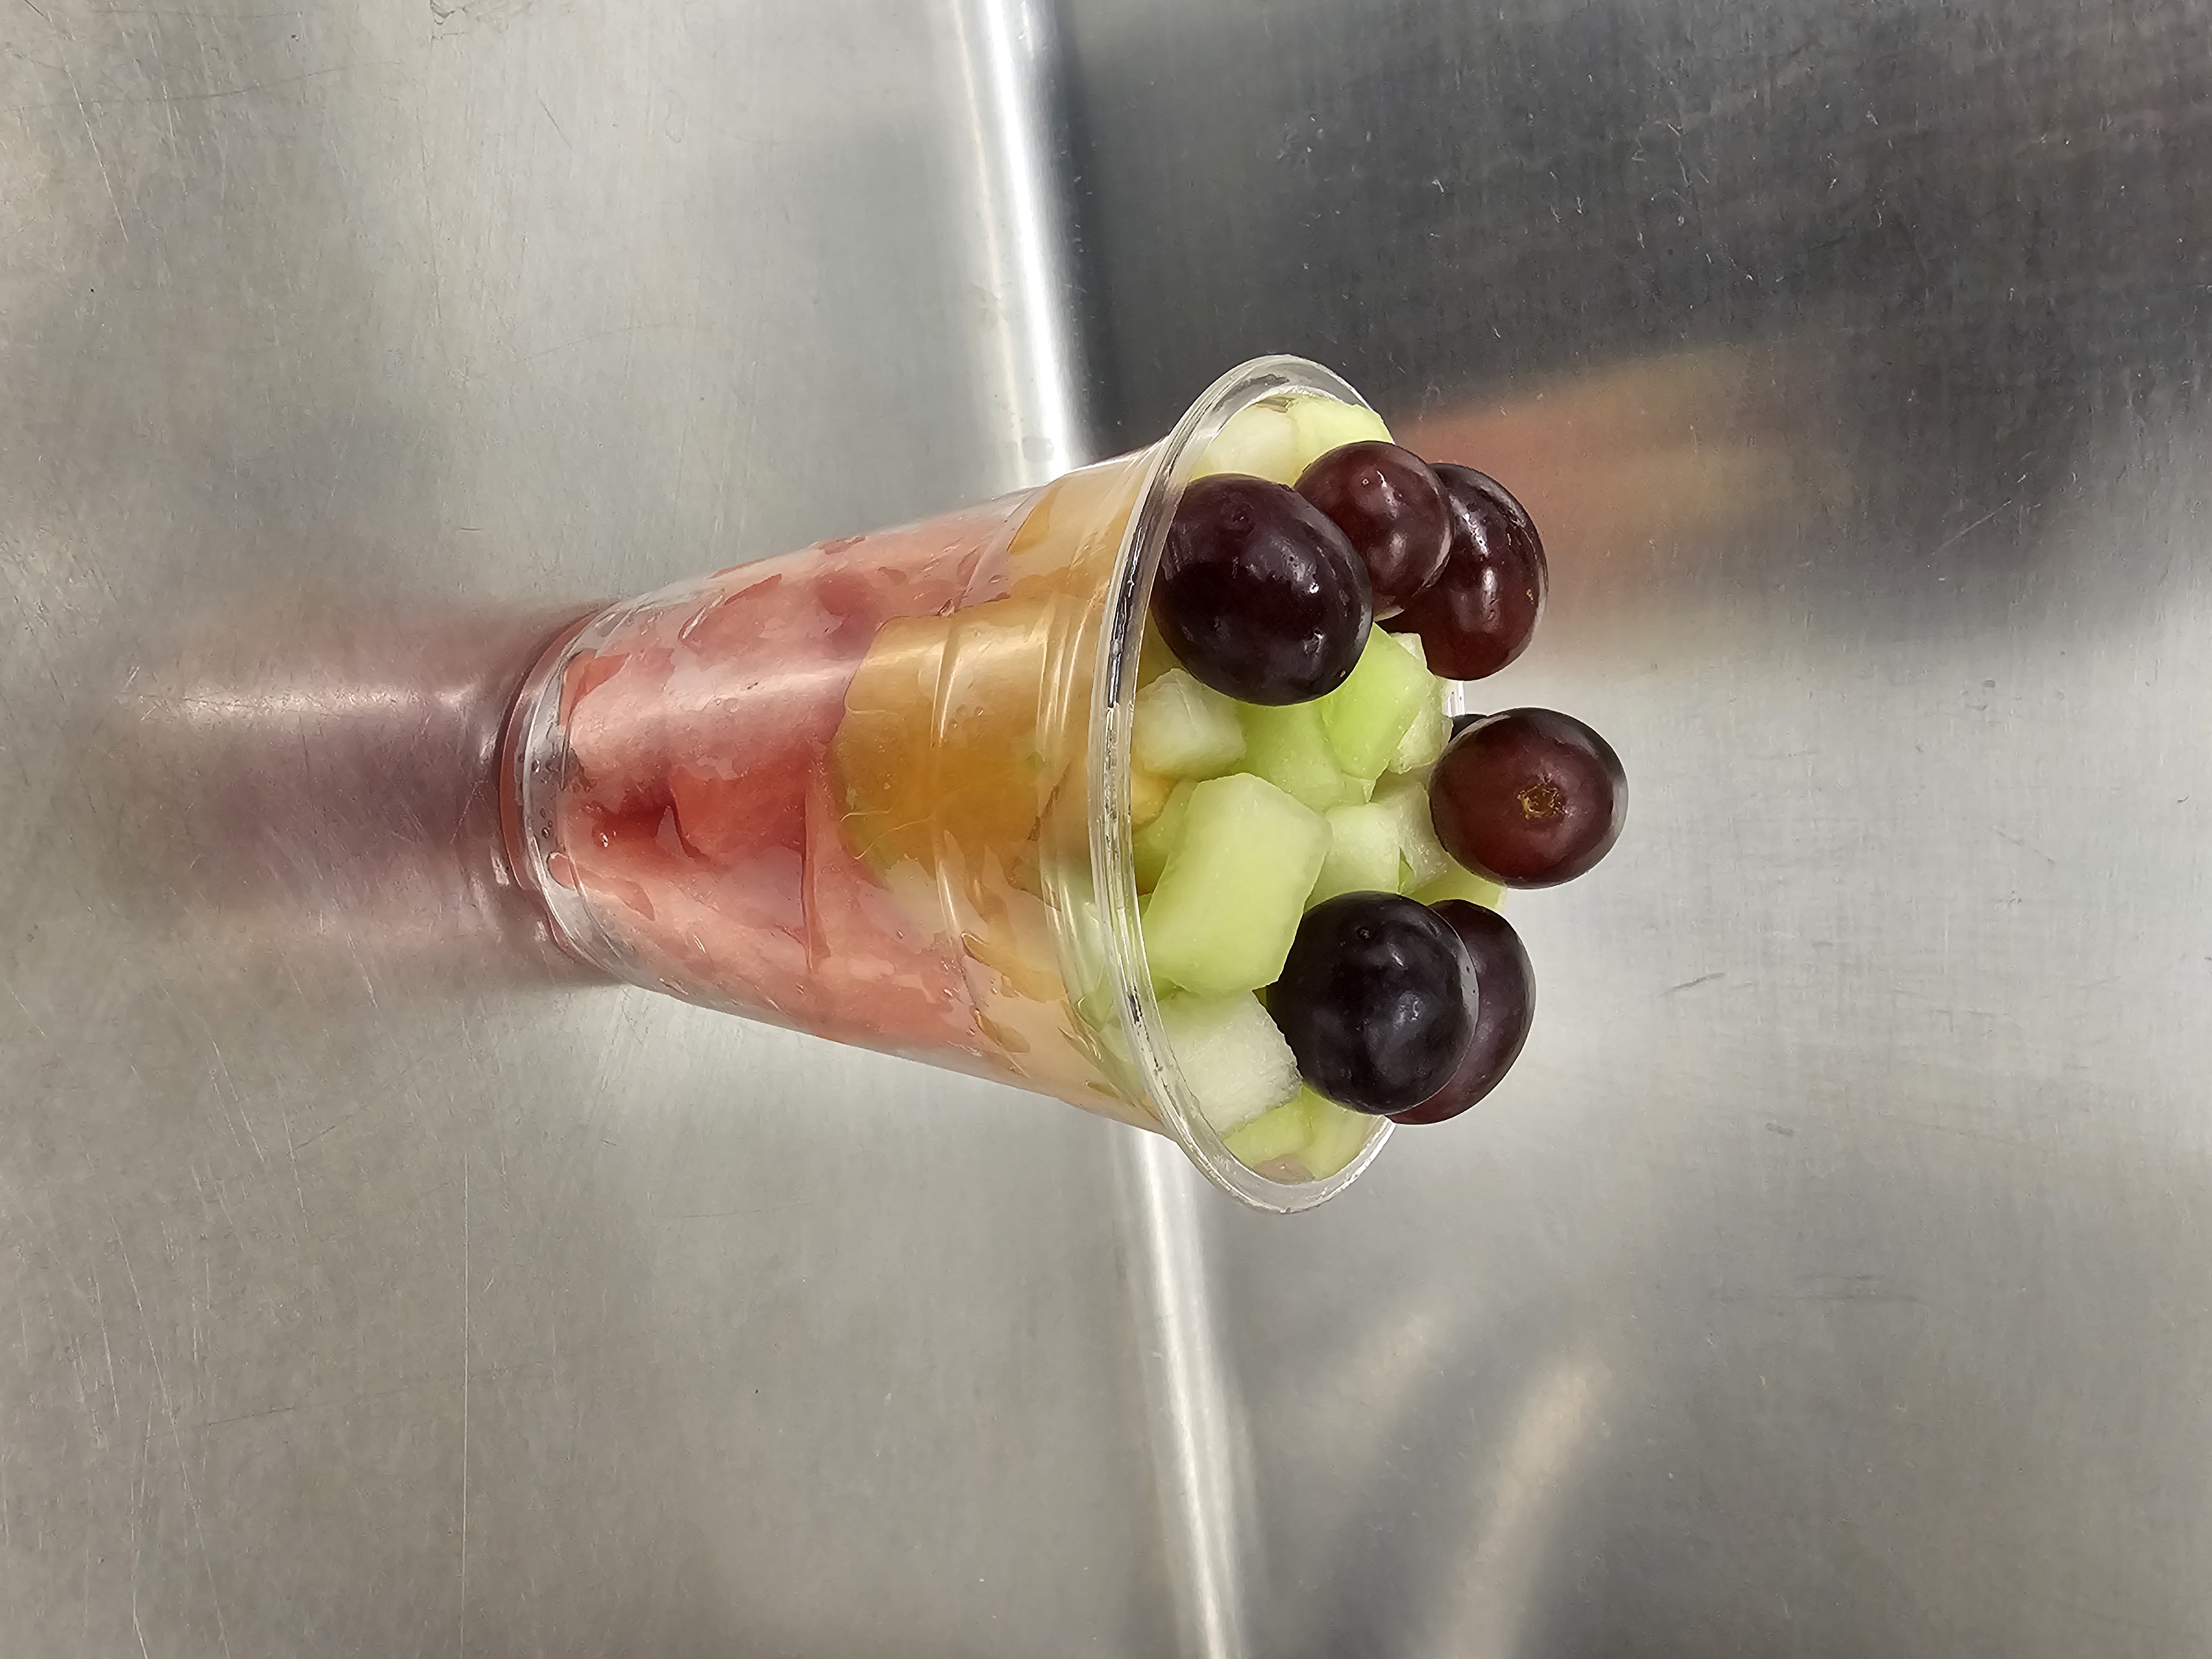 Fruit Cup